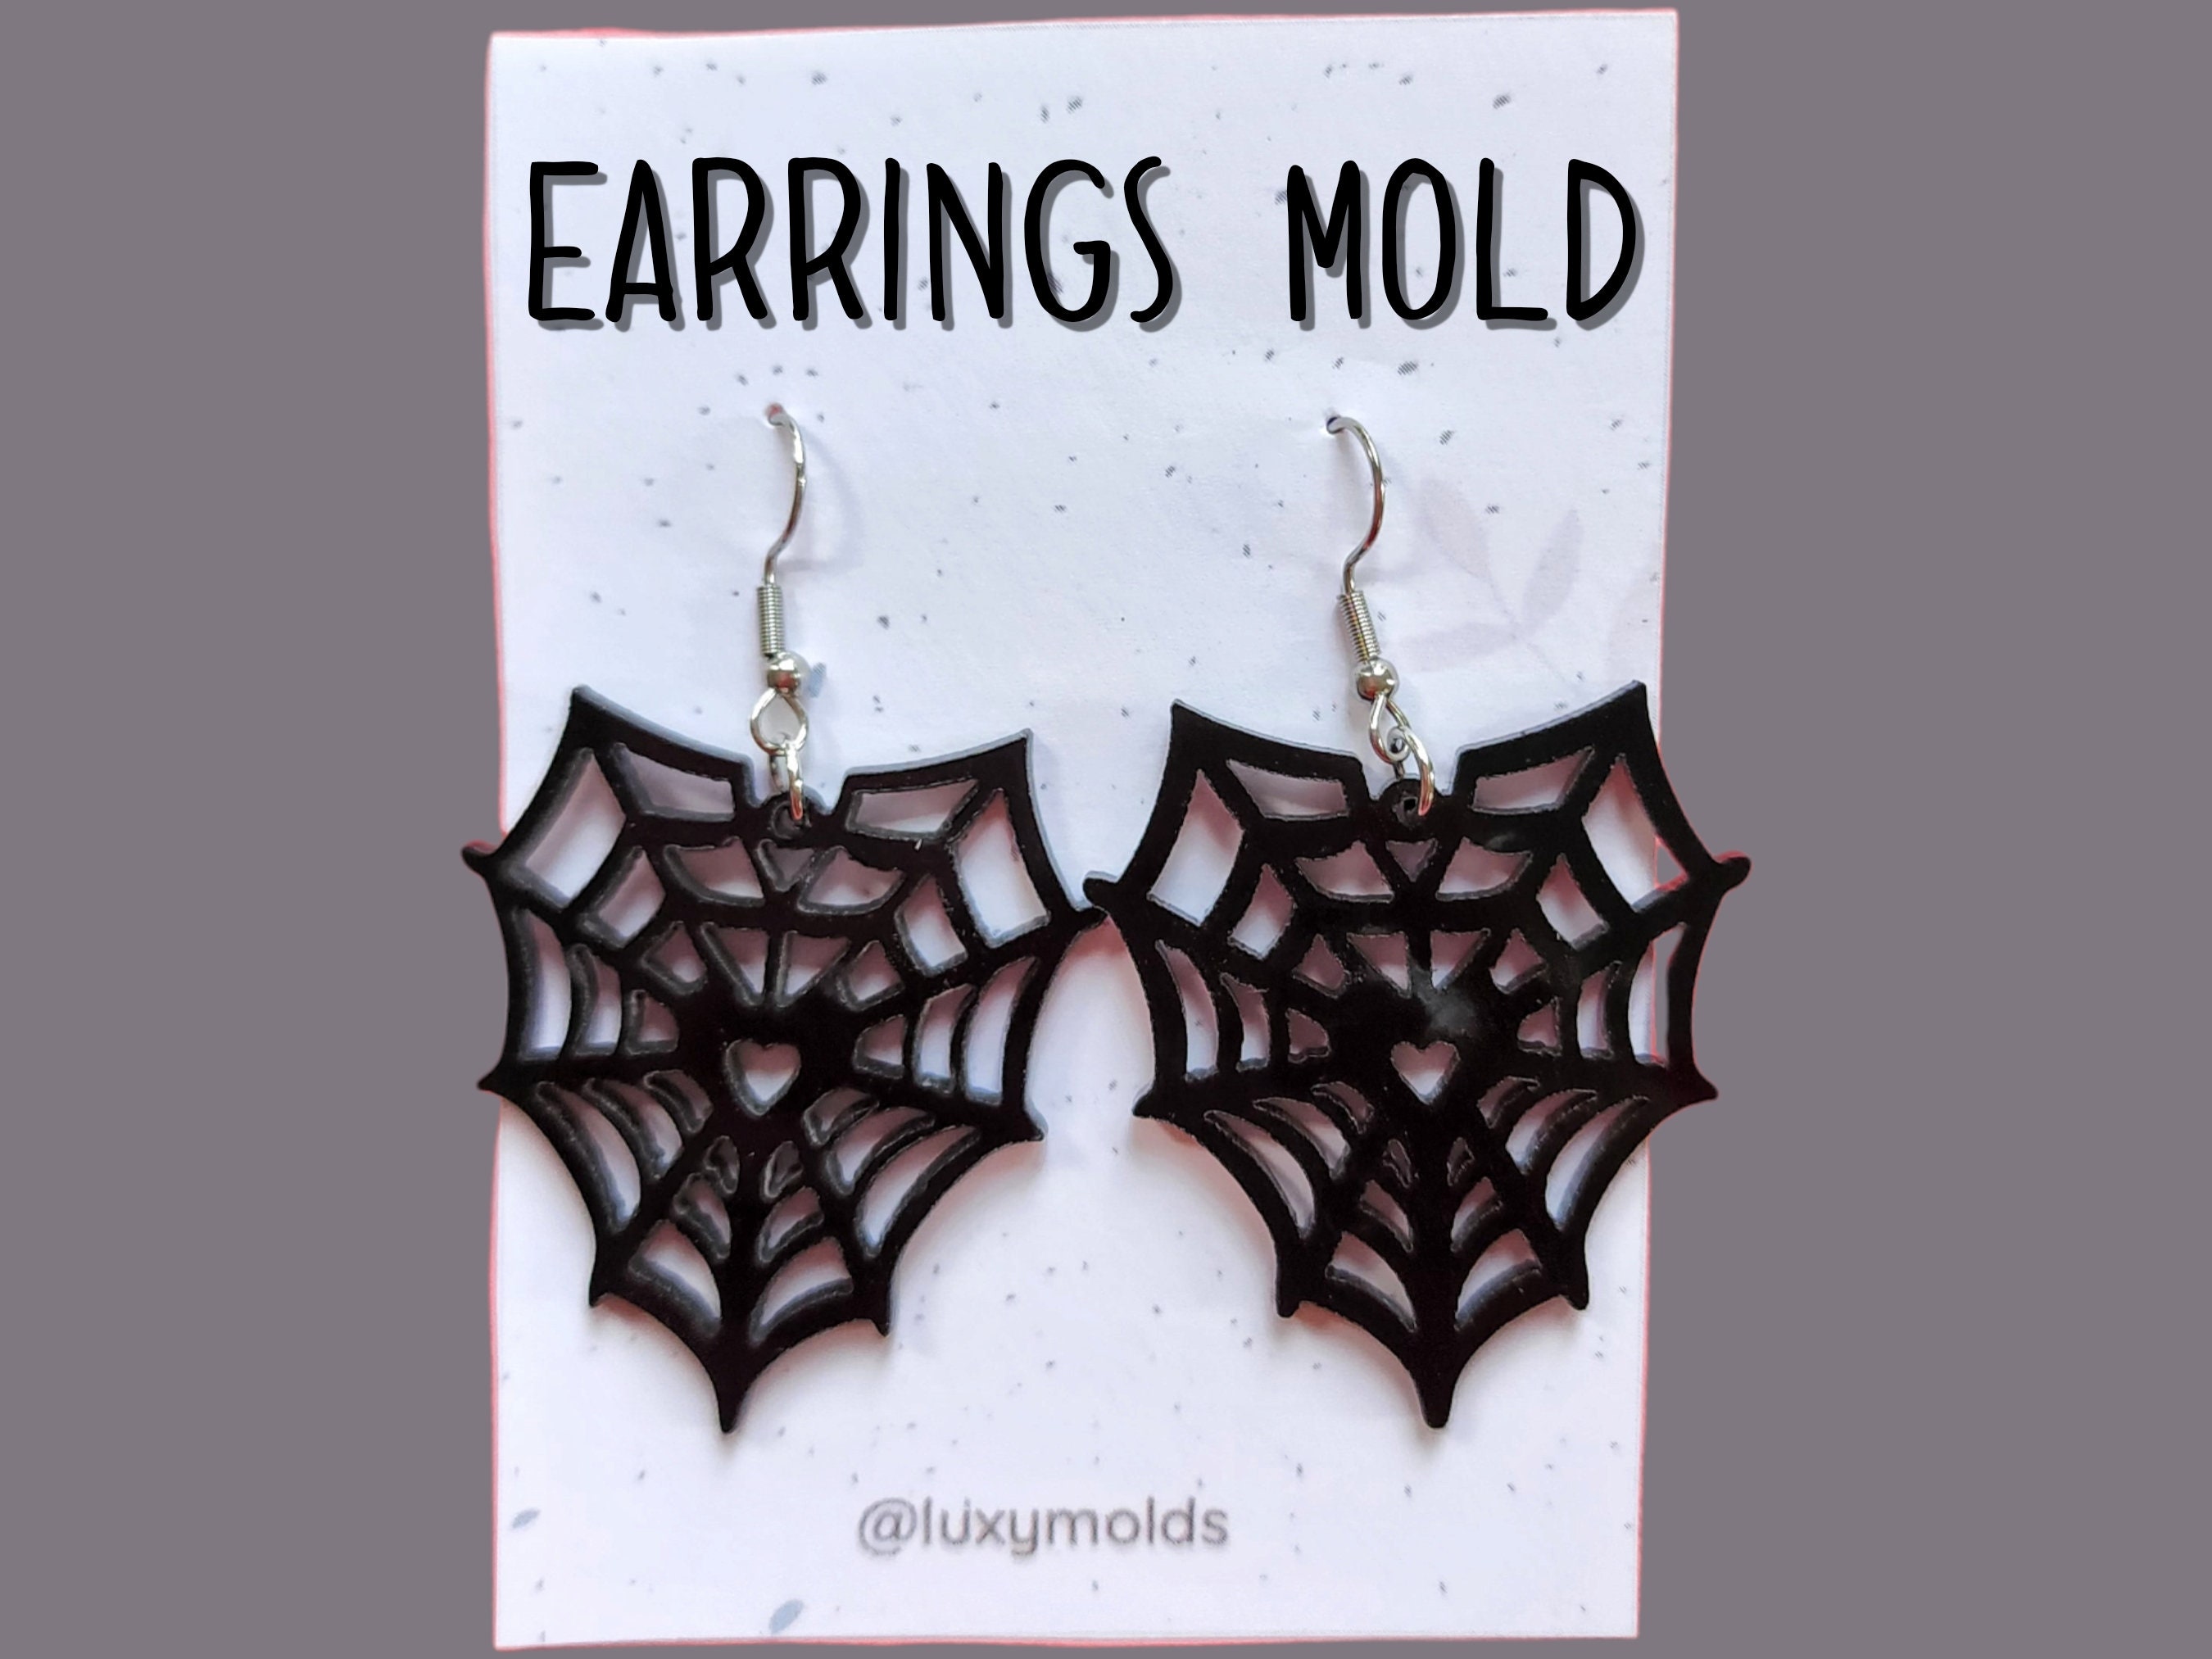 Silicone Earrings Mold / Silicone Epoxy Mold / Silicone Earring